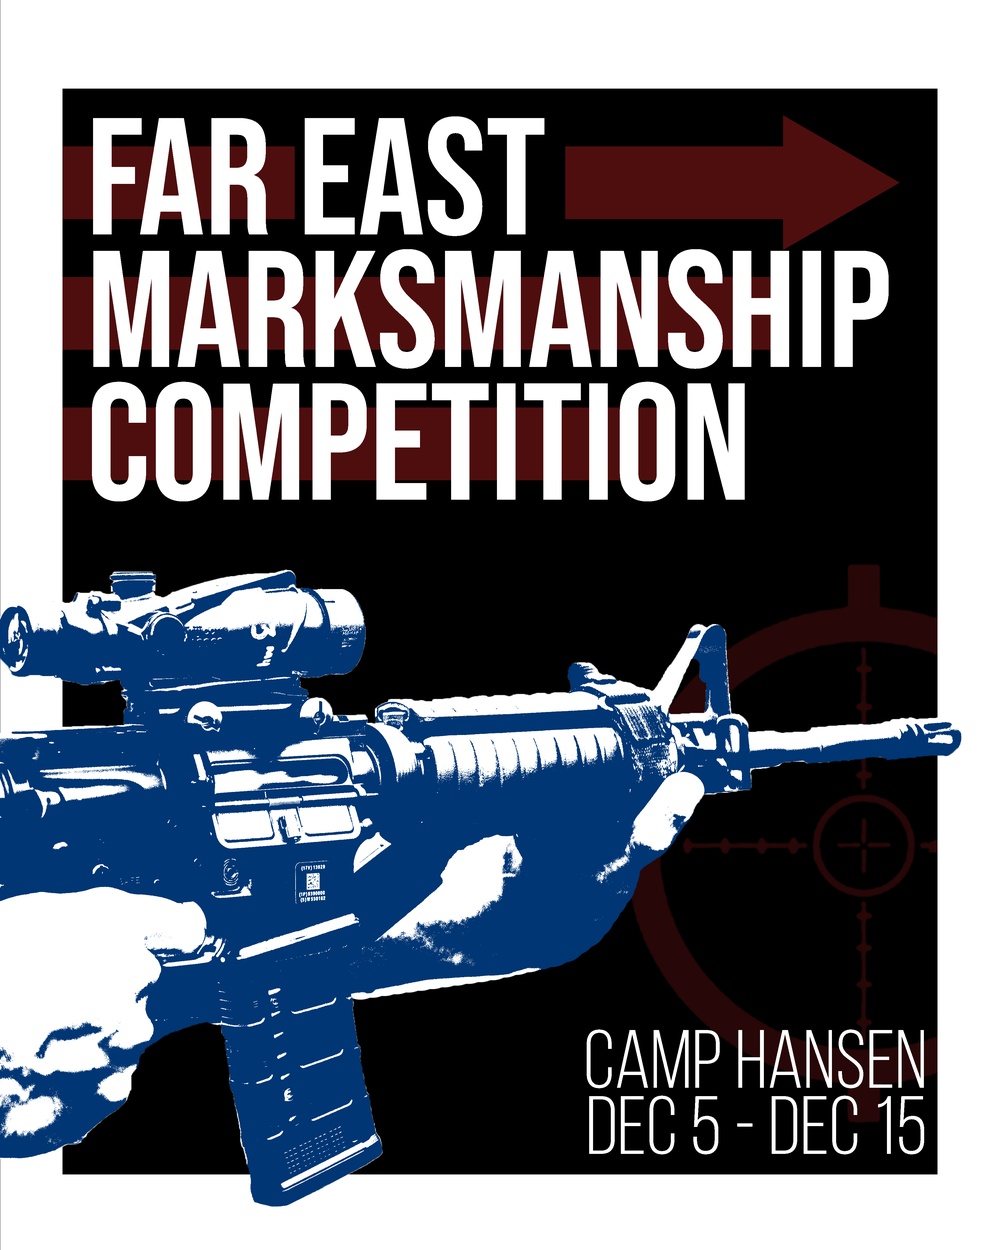 Far East Marksmanship Competition Graphic